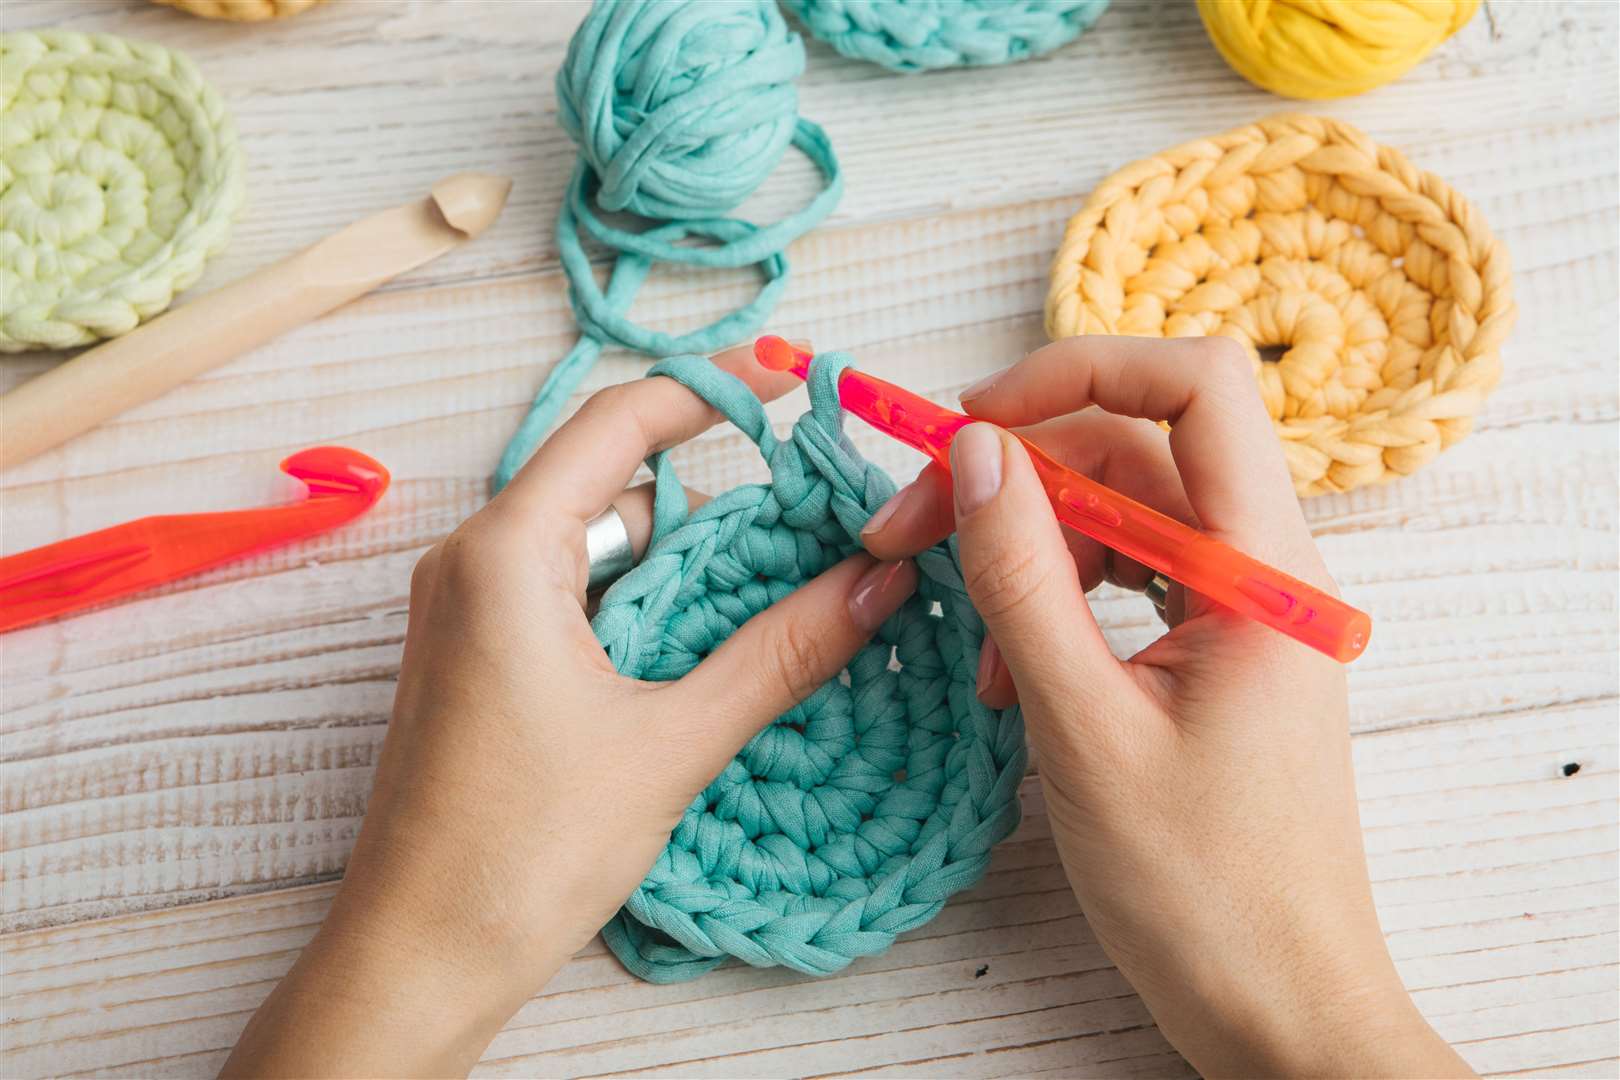 Crocheting a Christmas gift for someone is a great option